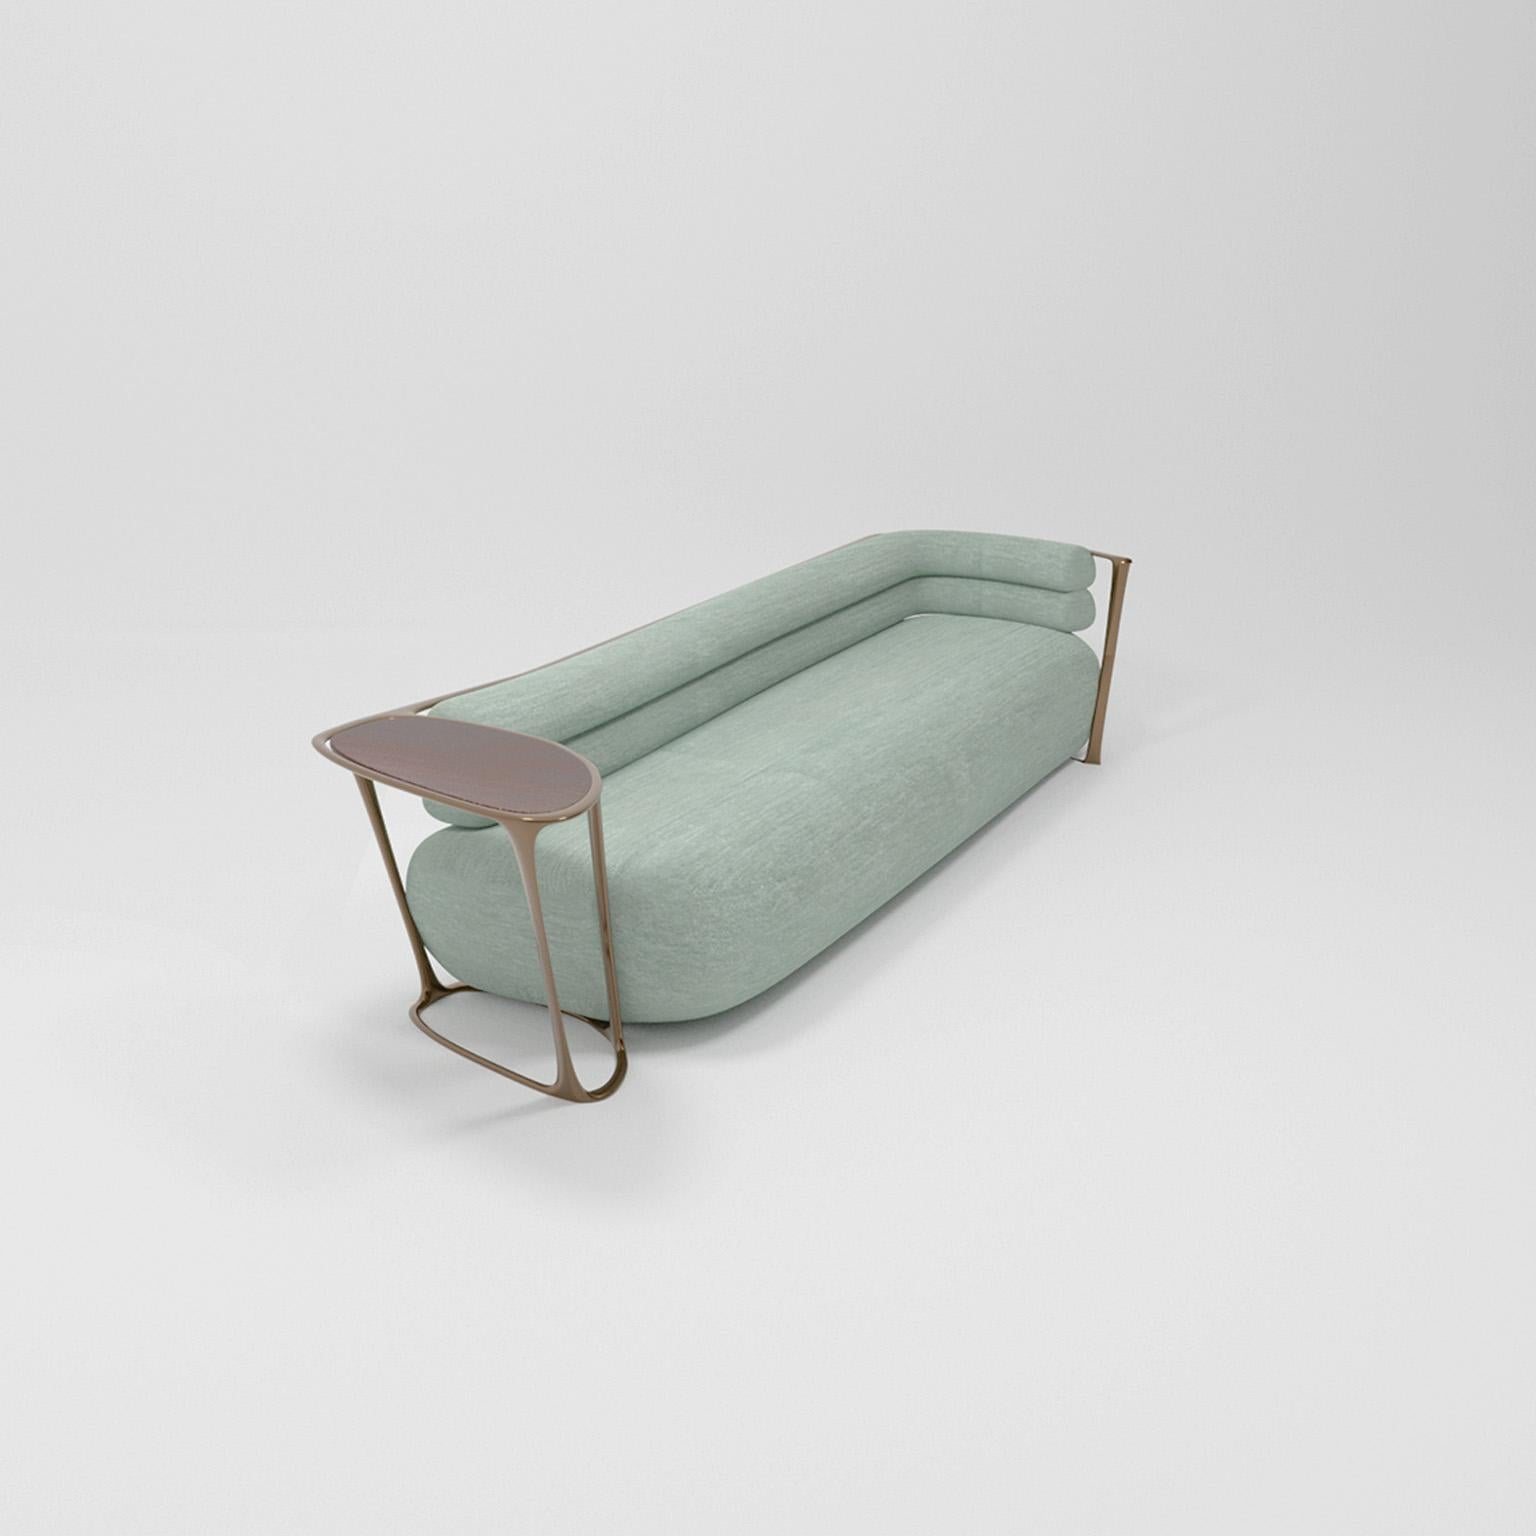 Organic Modern 21st Century, Bronzed Frame Low Beam Bench Mint Sofa with Table by Studio Sors